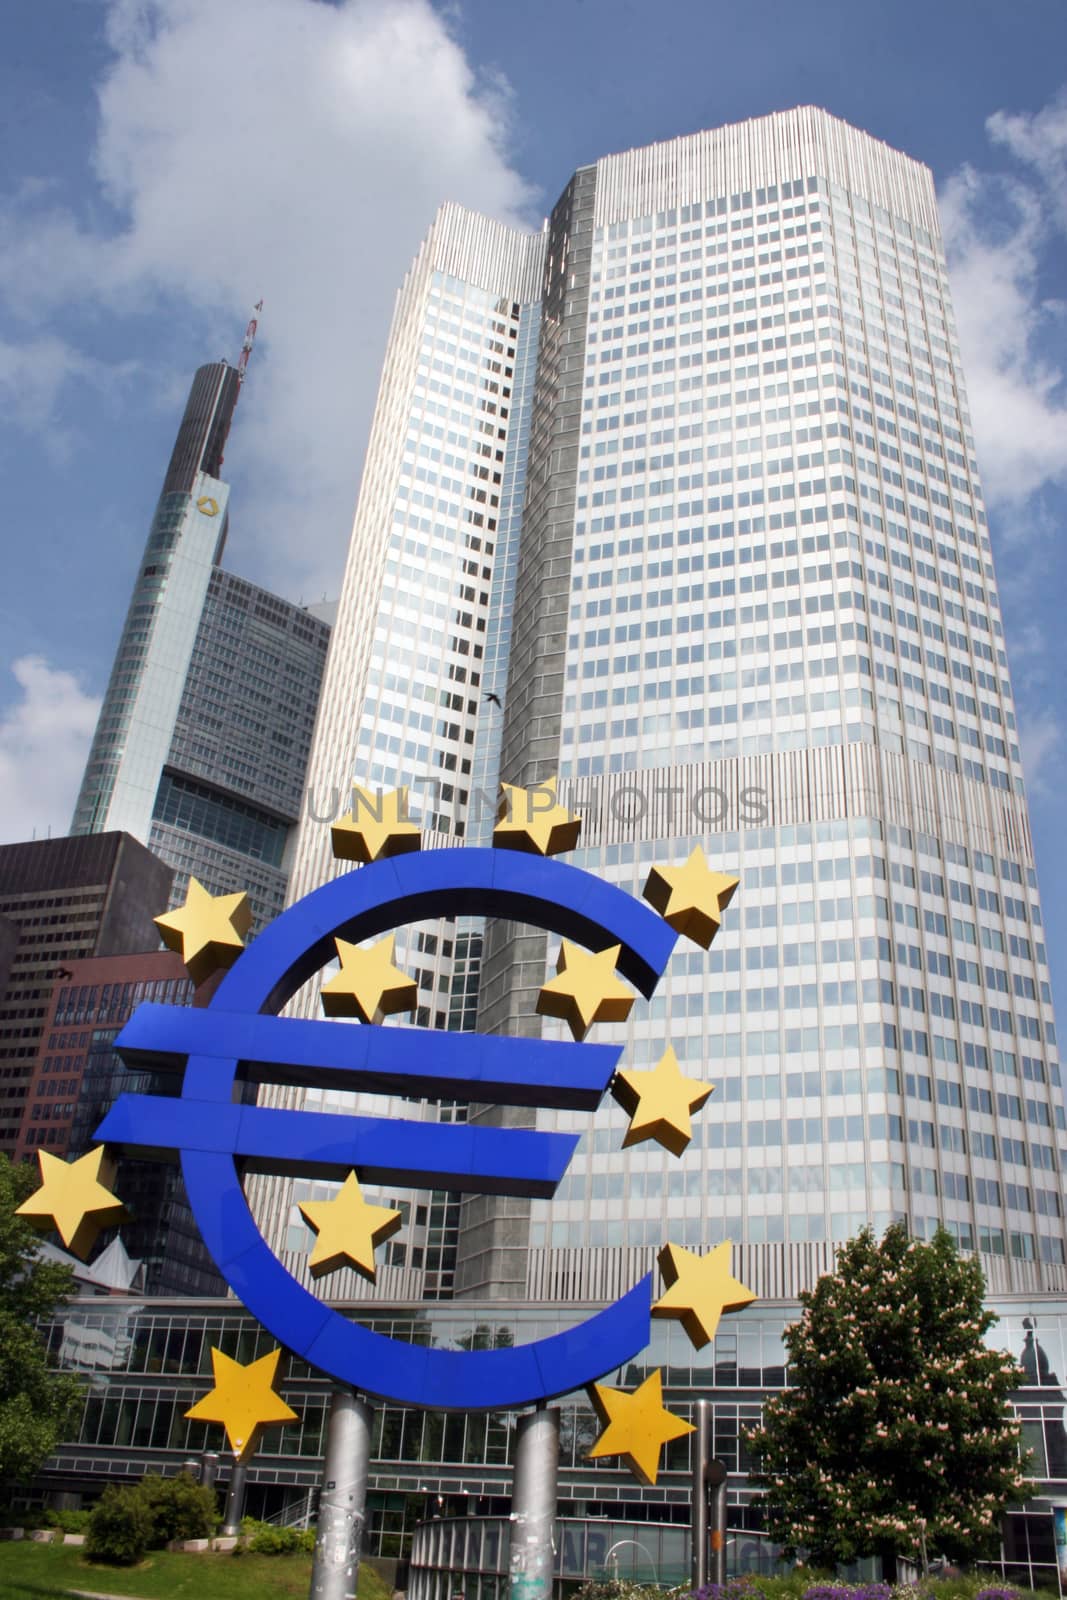 The European Central Bank (ECB), situated in Frankfurt, Germany  is the central bank for the euro and administers the monetary policy of the Eurozone.